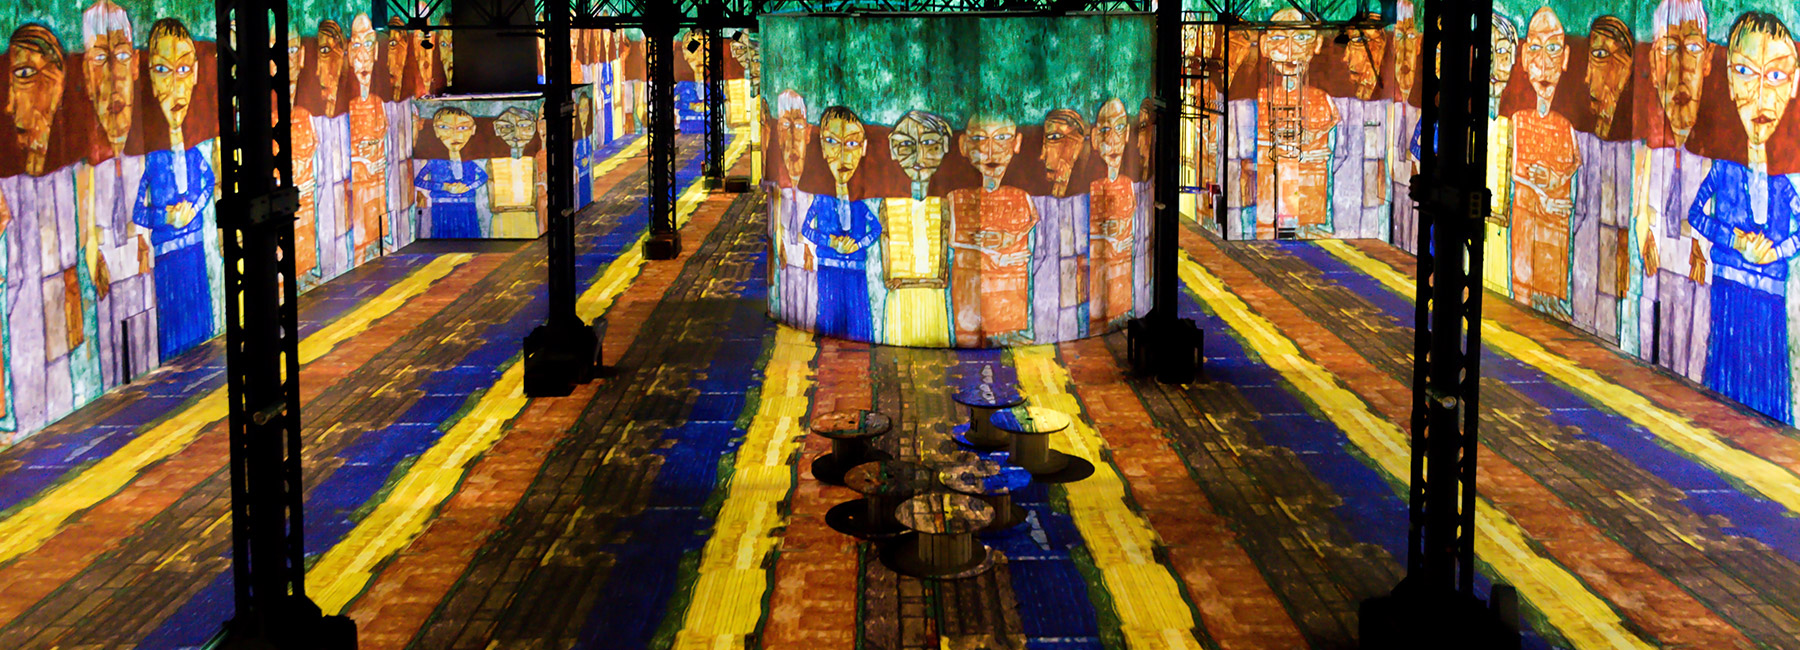 gustav klimt's works drip with life from these giant wall-to-wall projections